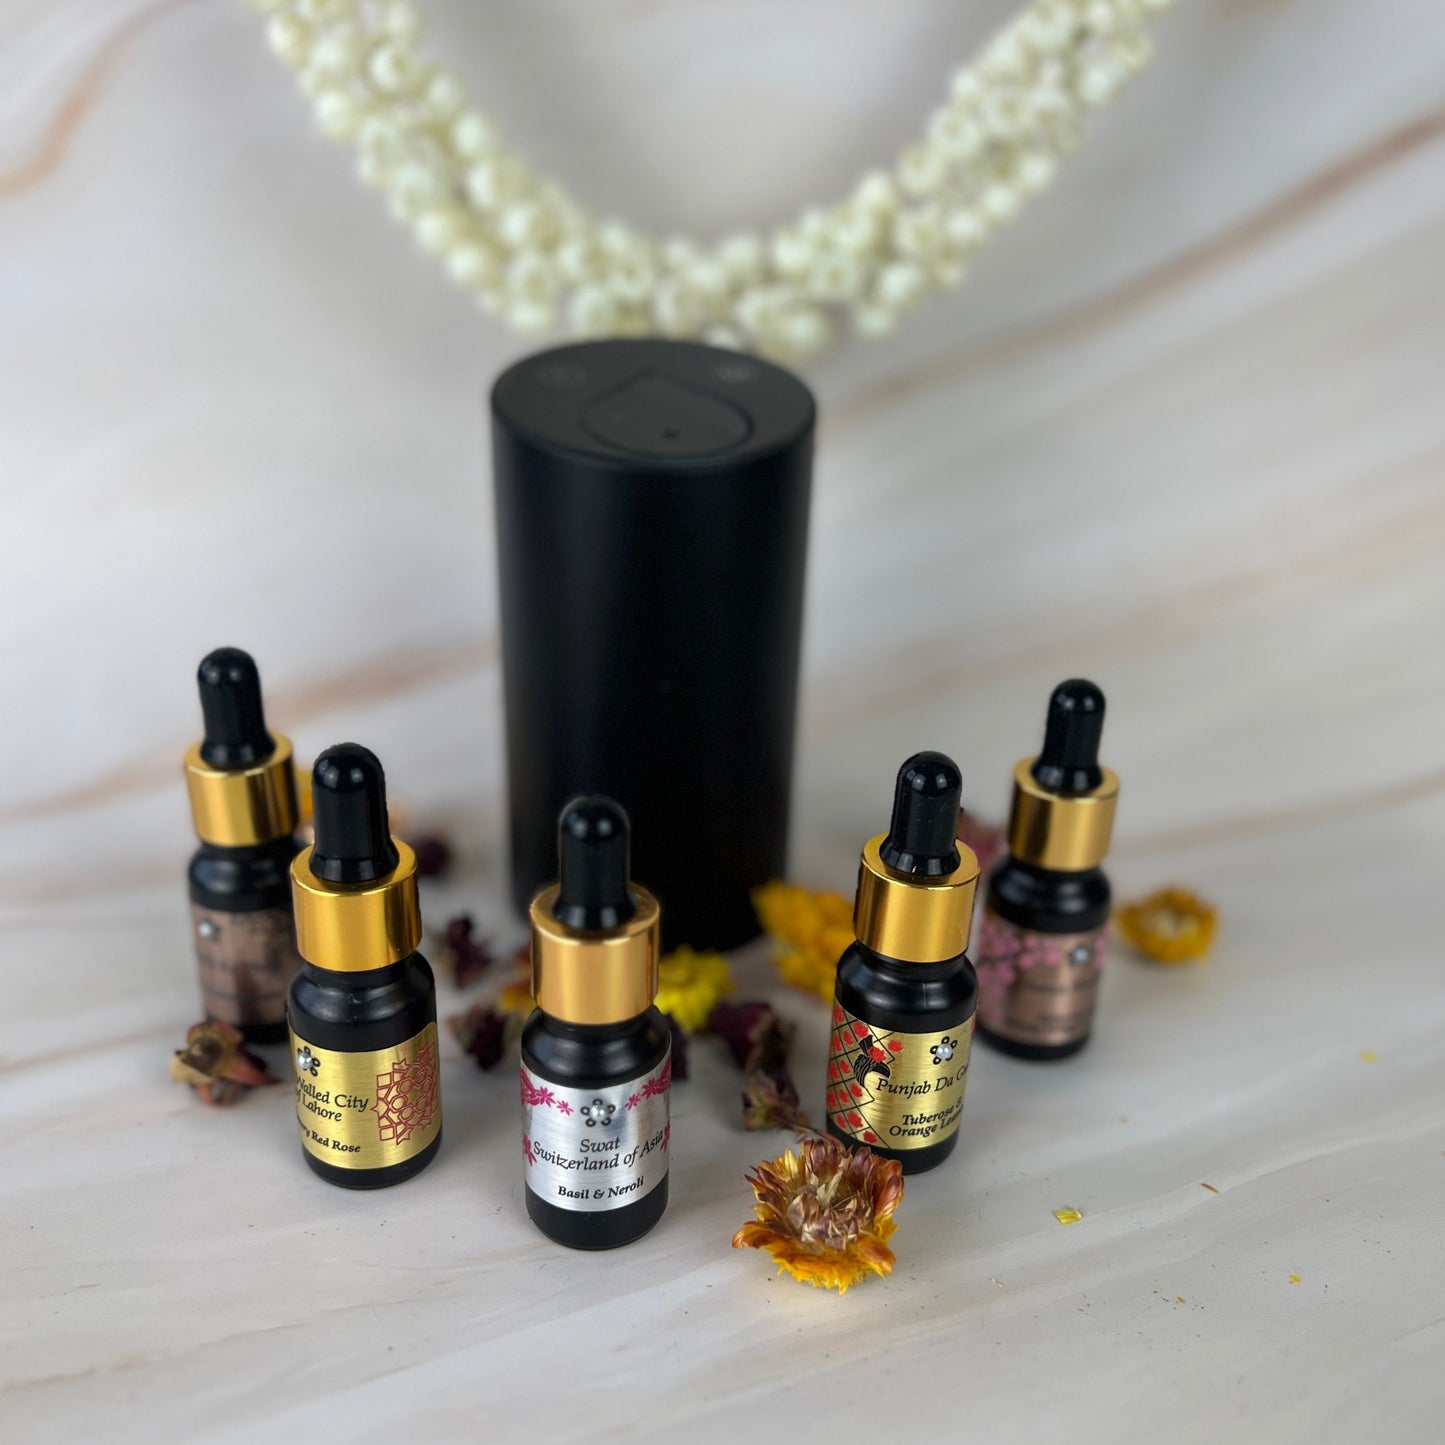 Luxury Mobile Diffusers for fragrance oils